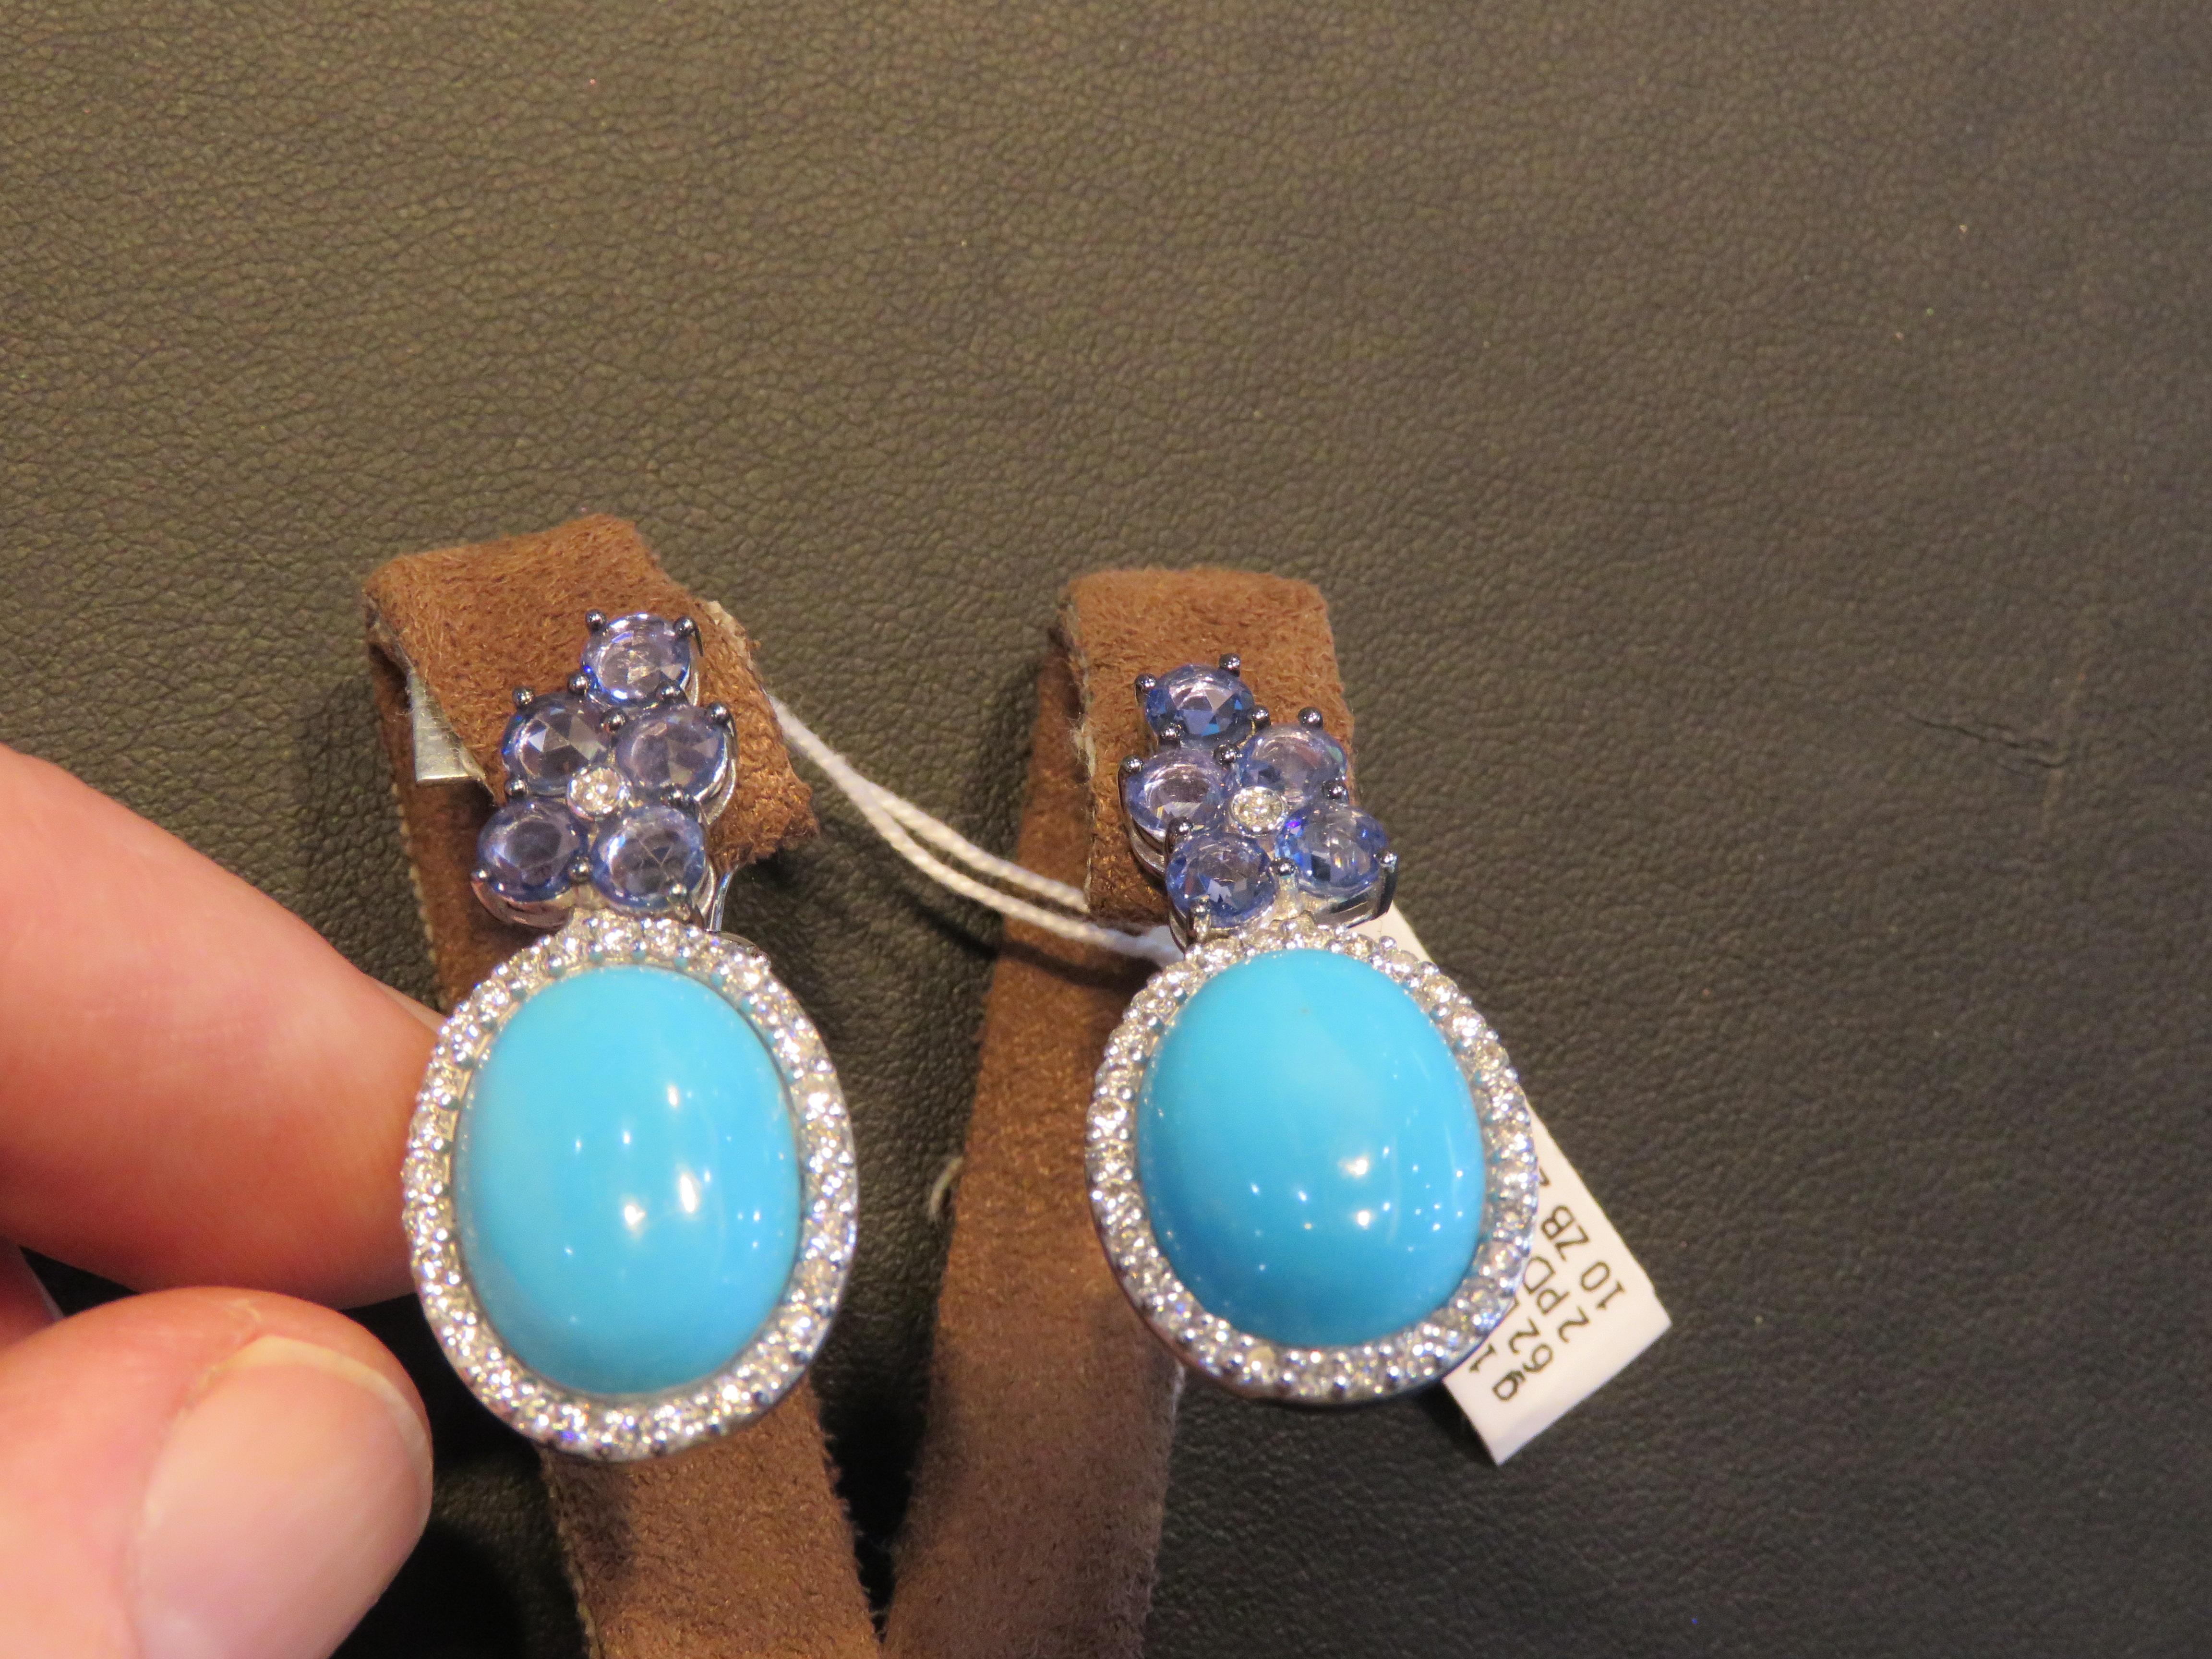 Mixed Cut NWT $9, 800 18KT 6.5CT Glittering Fancy Turquoise Blue Sapphire Diamond Earrings For Sale